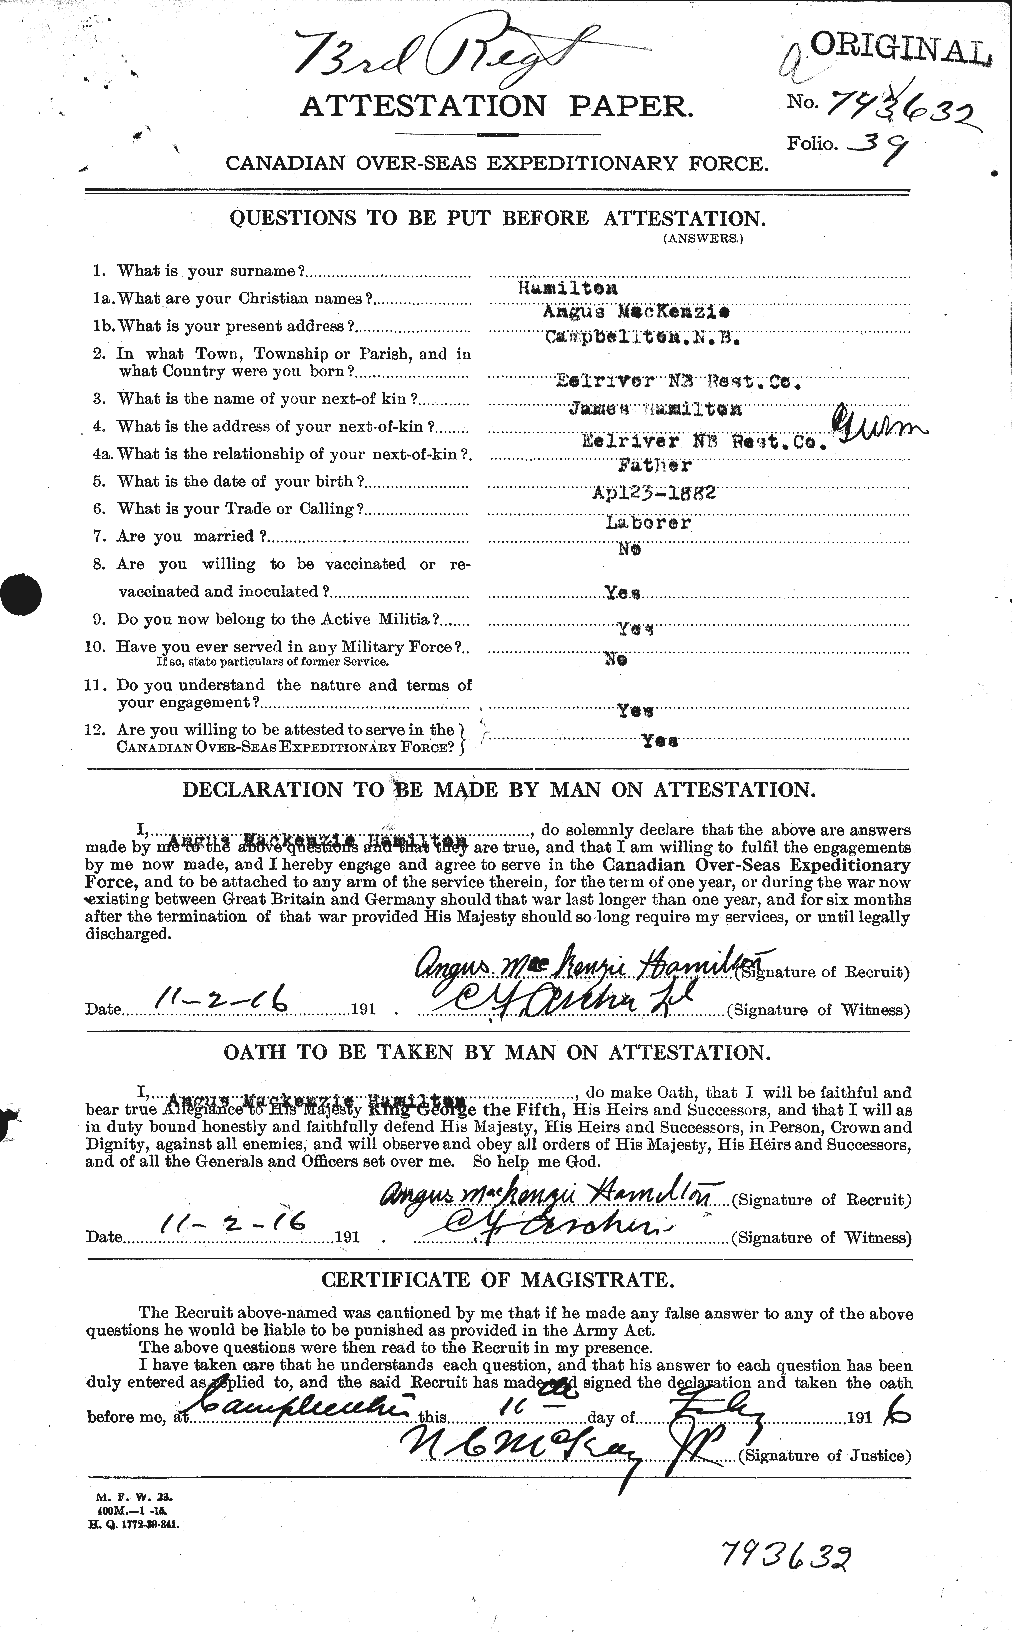 Personnel Records of the First World War - CEF 375240a